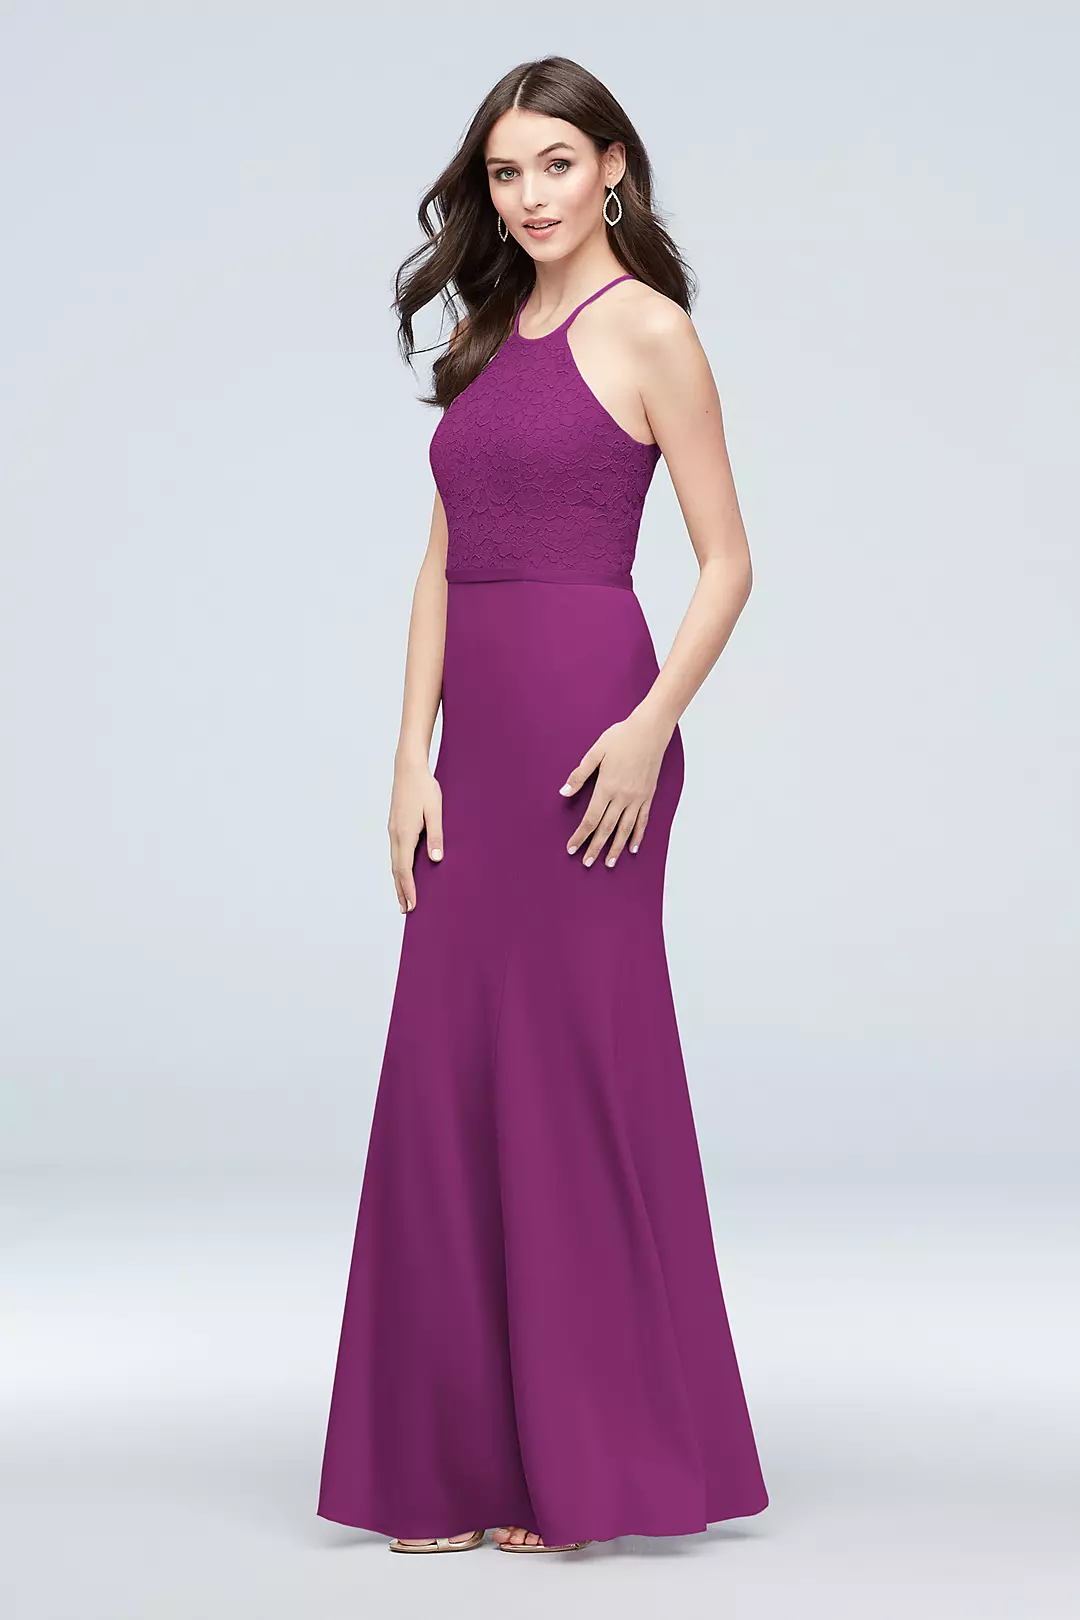 Lace and Stretch Crepe High-Neck Bridesmaid Dress Image